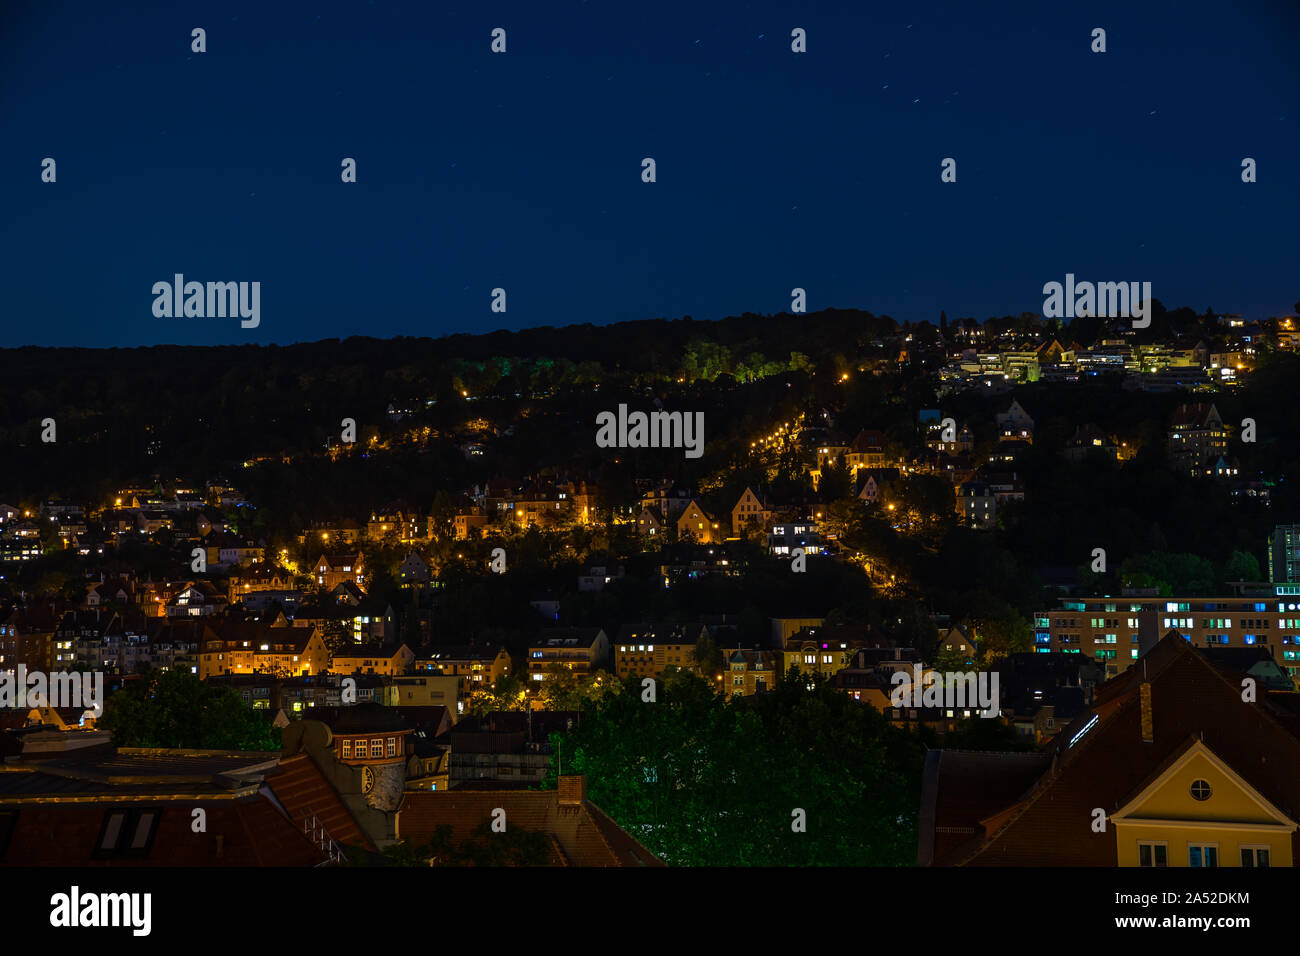 Germany, Starry sky in the night over illuminated stuttgart heslach houses and roofs aerial view over skyline by night Stock Photo